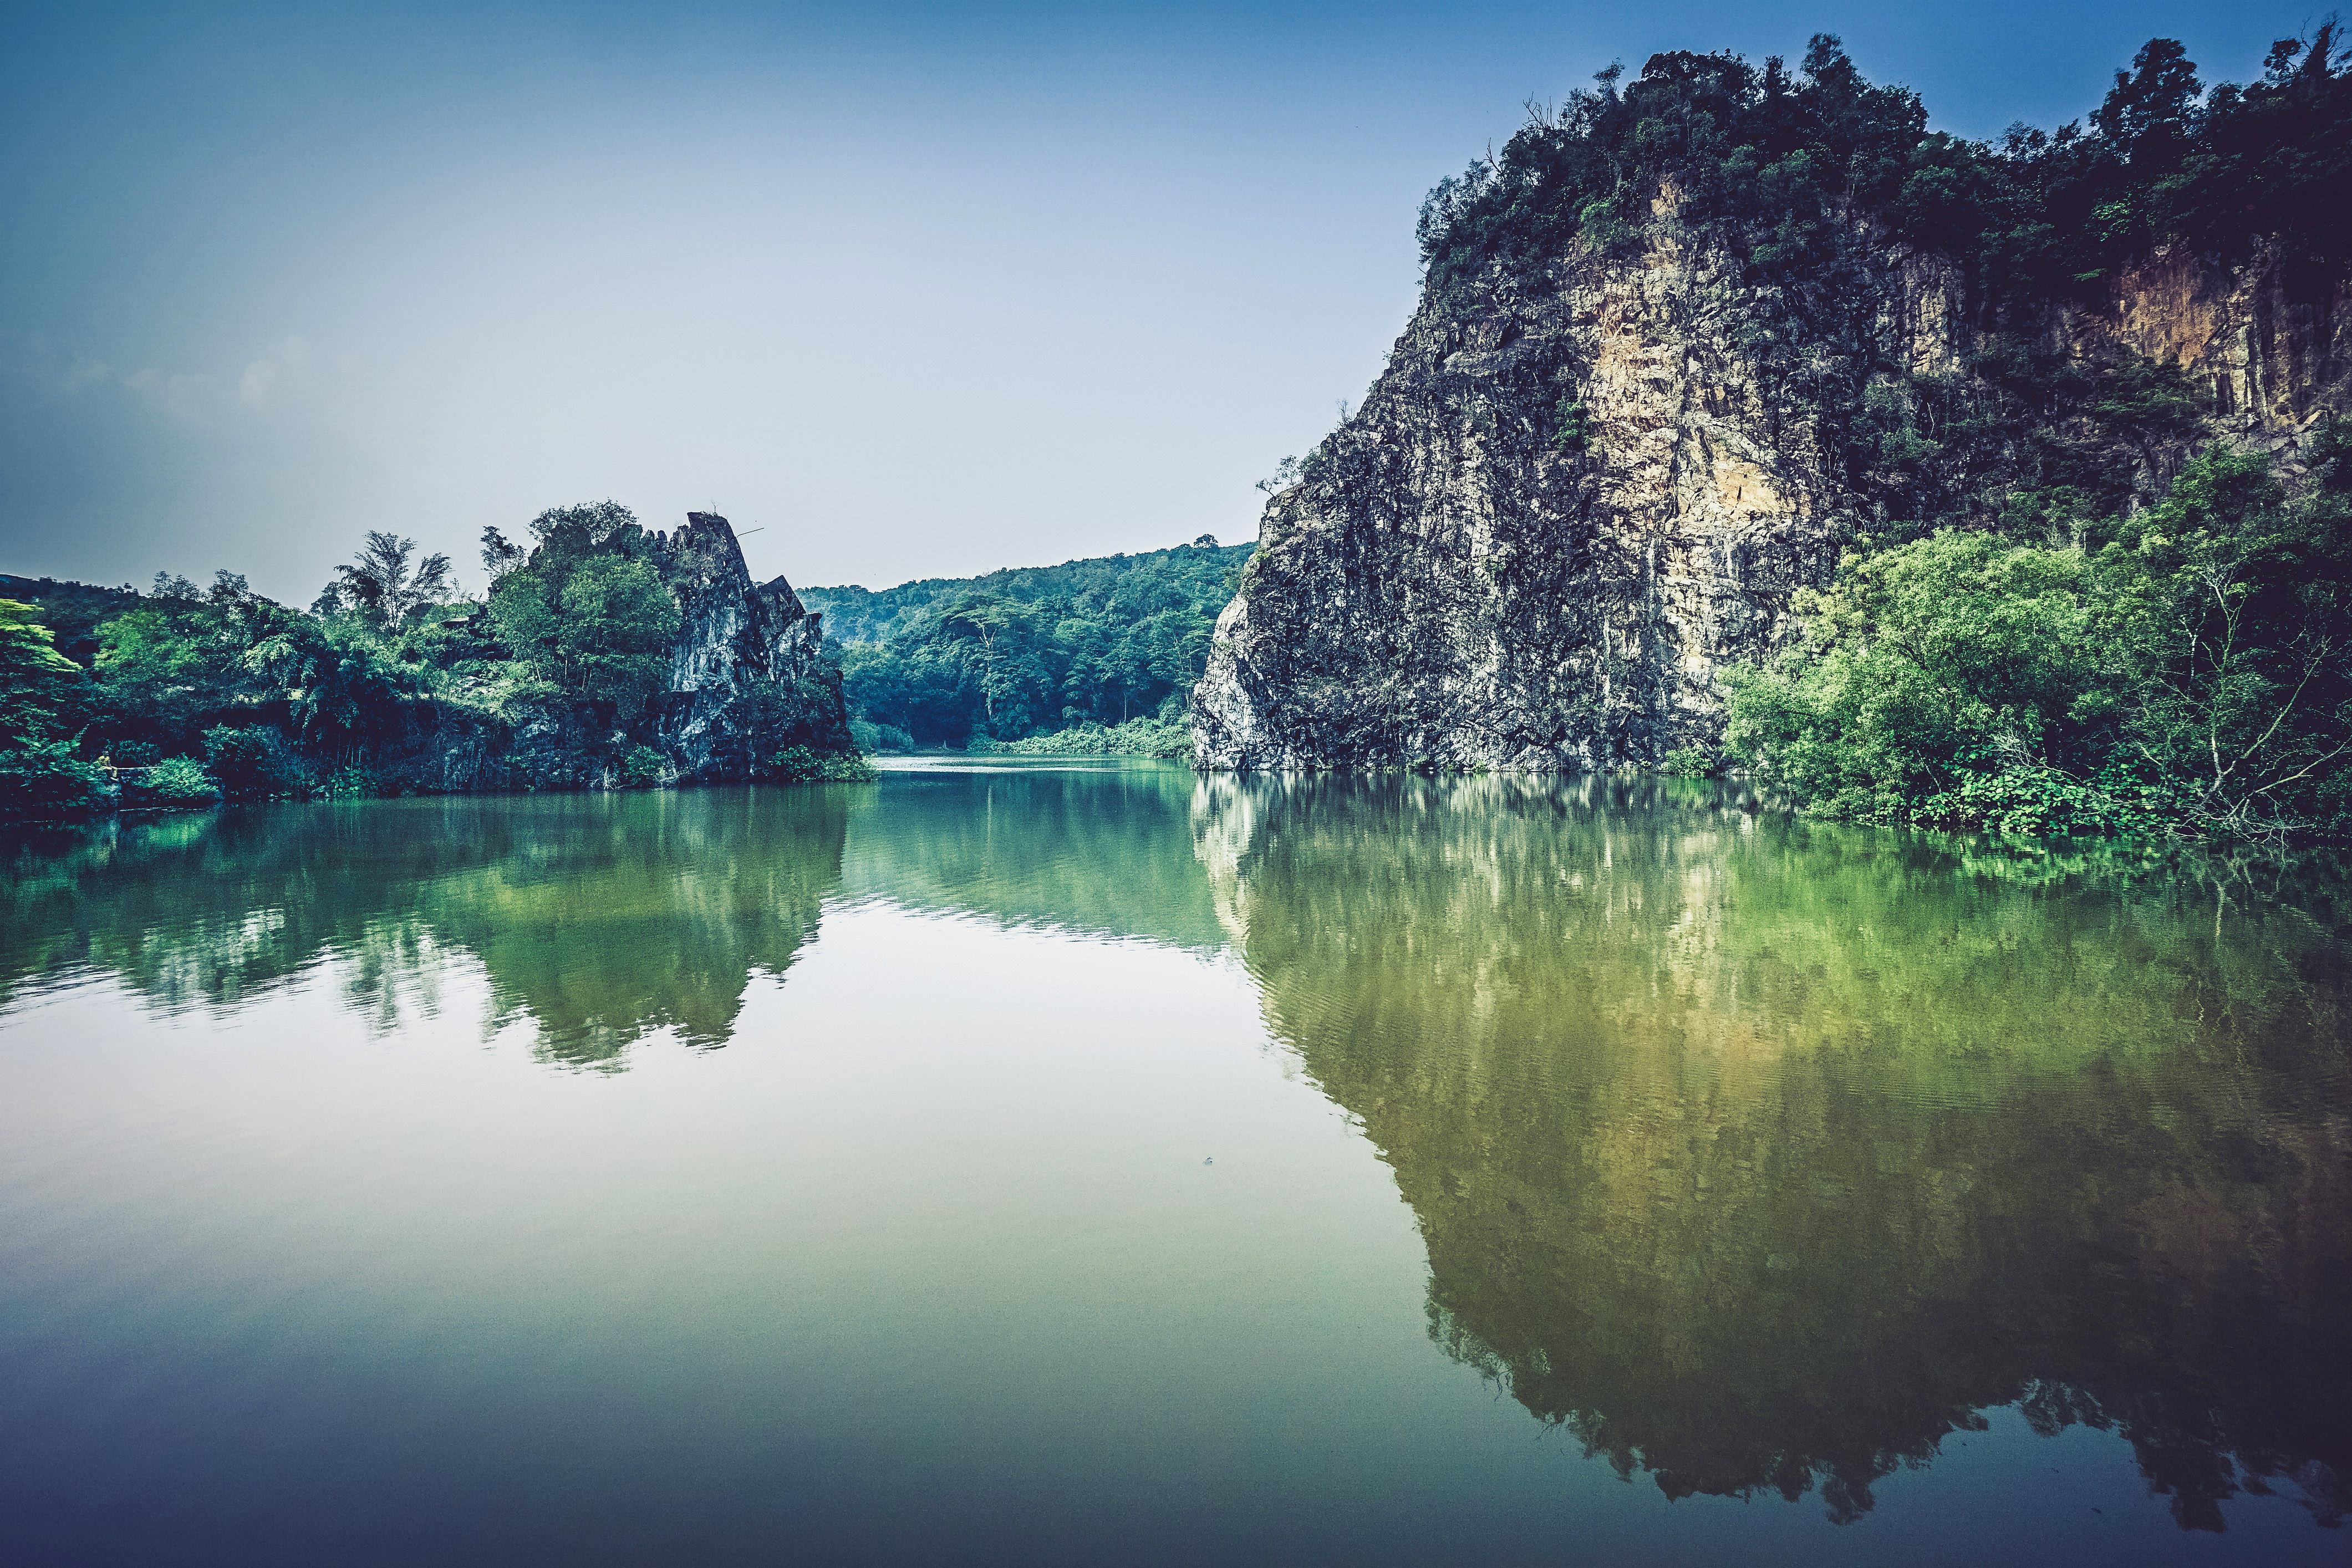  River  landscape  in Singapore image Free stock photo  